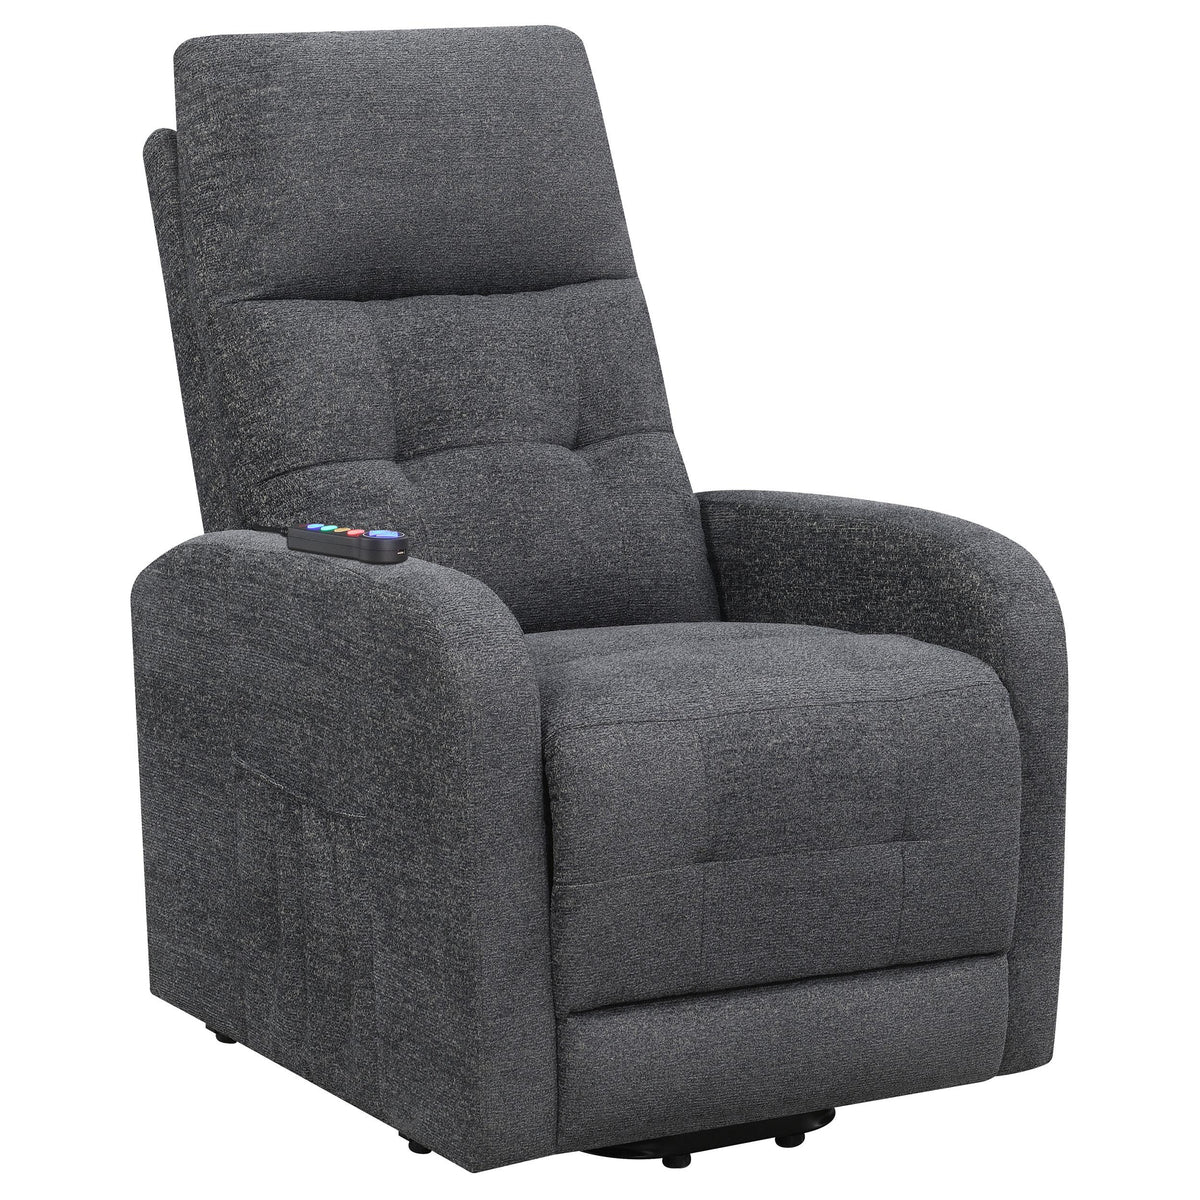 Howie Tufted Upholstered Power Lift Recliner Charcoal  Half Price Furniture